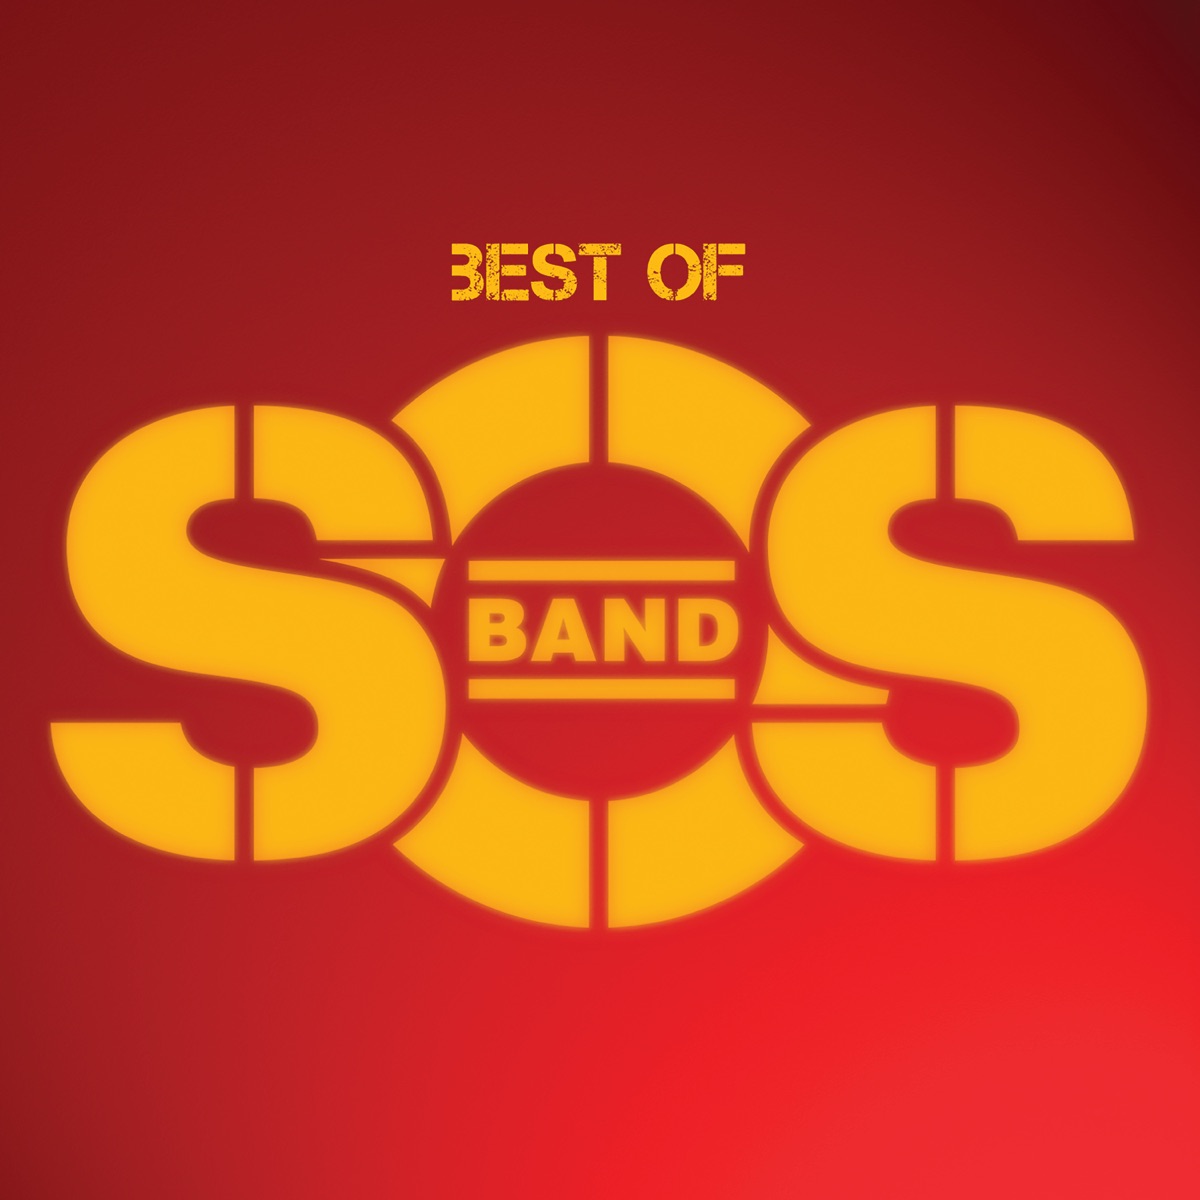 Best Of - Album by The S.O.S. Band - Apple Music